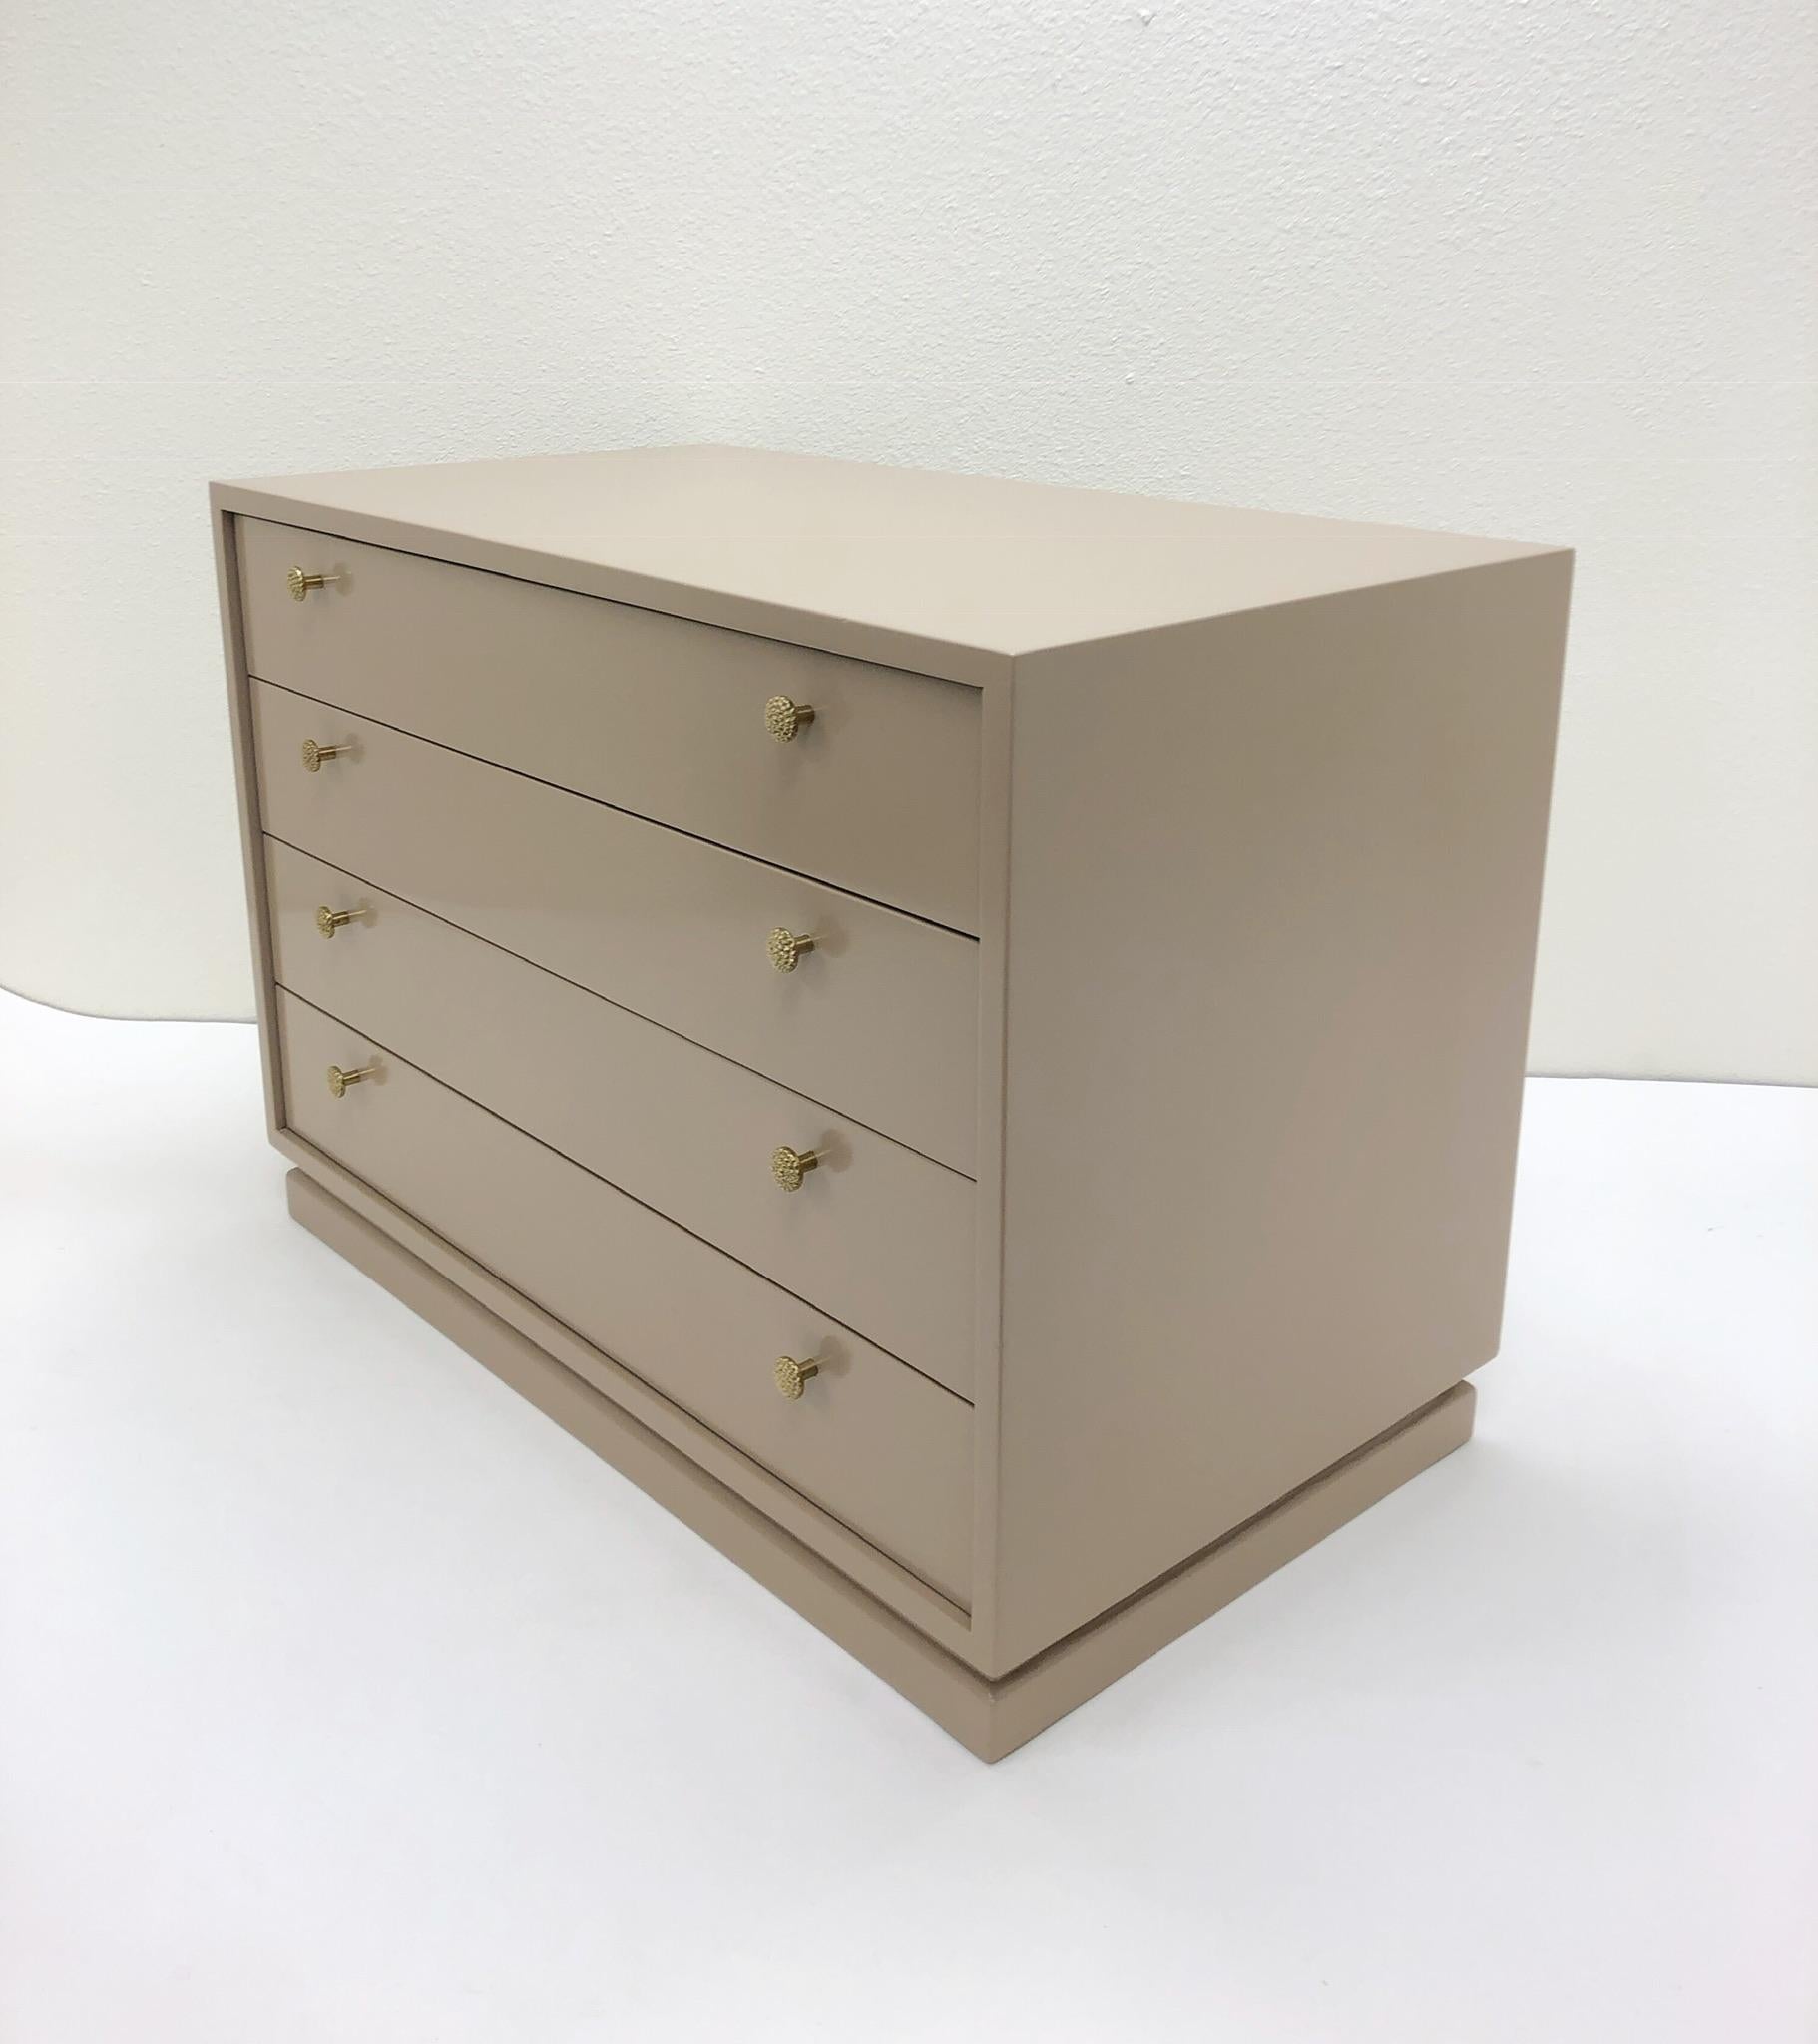 A glamorous lacquered and polished bronze four drawer nightstand design by Steve Chase in the 1980s. Newly lacquered in a light mocha brown color. 

Dimension: 34.5” wide, 19” deep, 24.5” high.